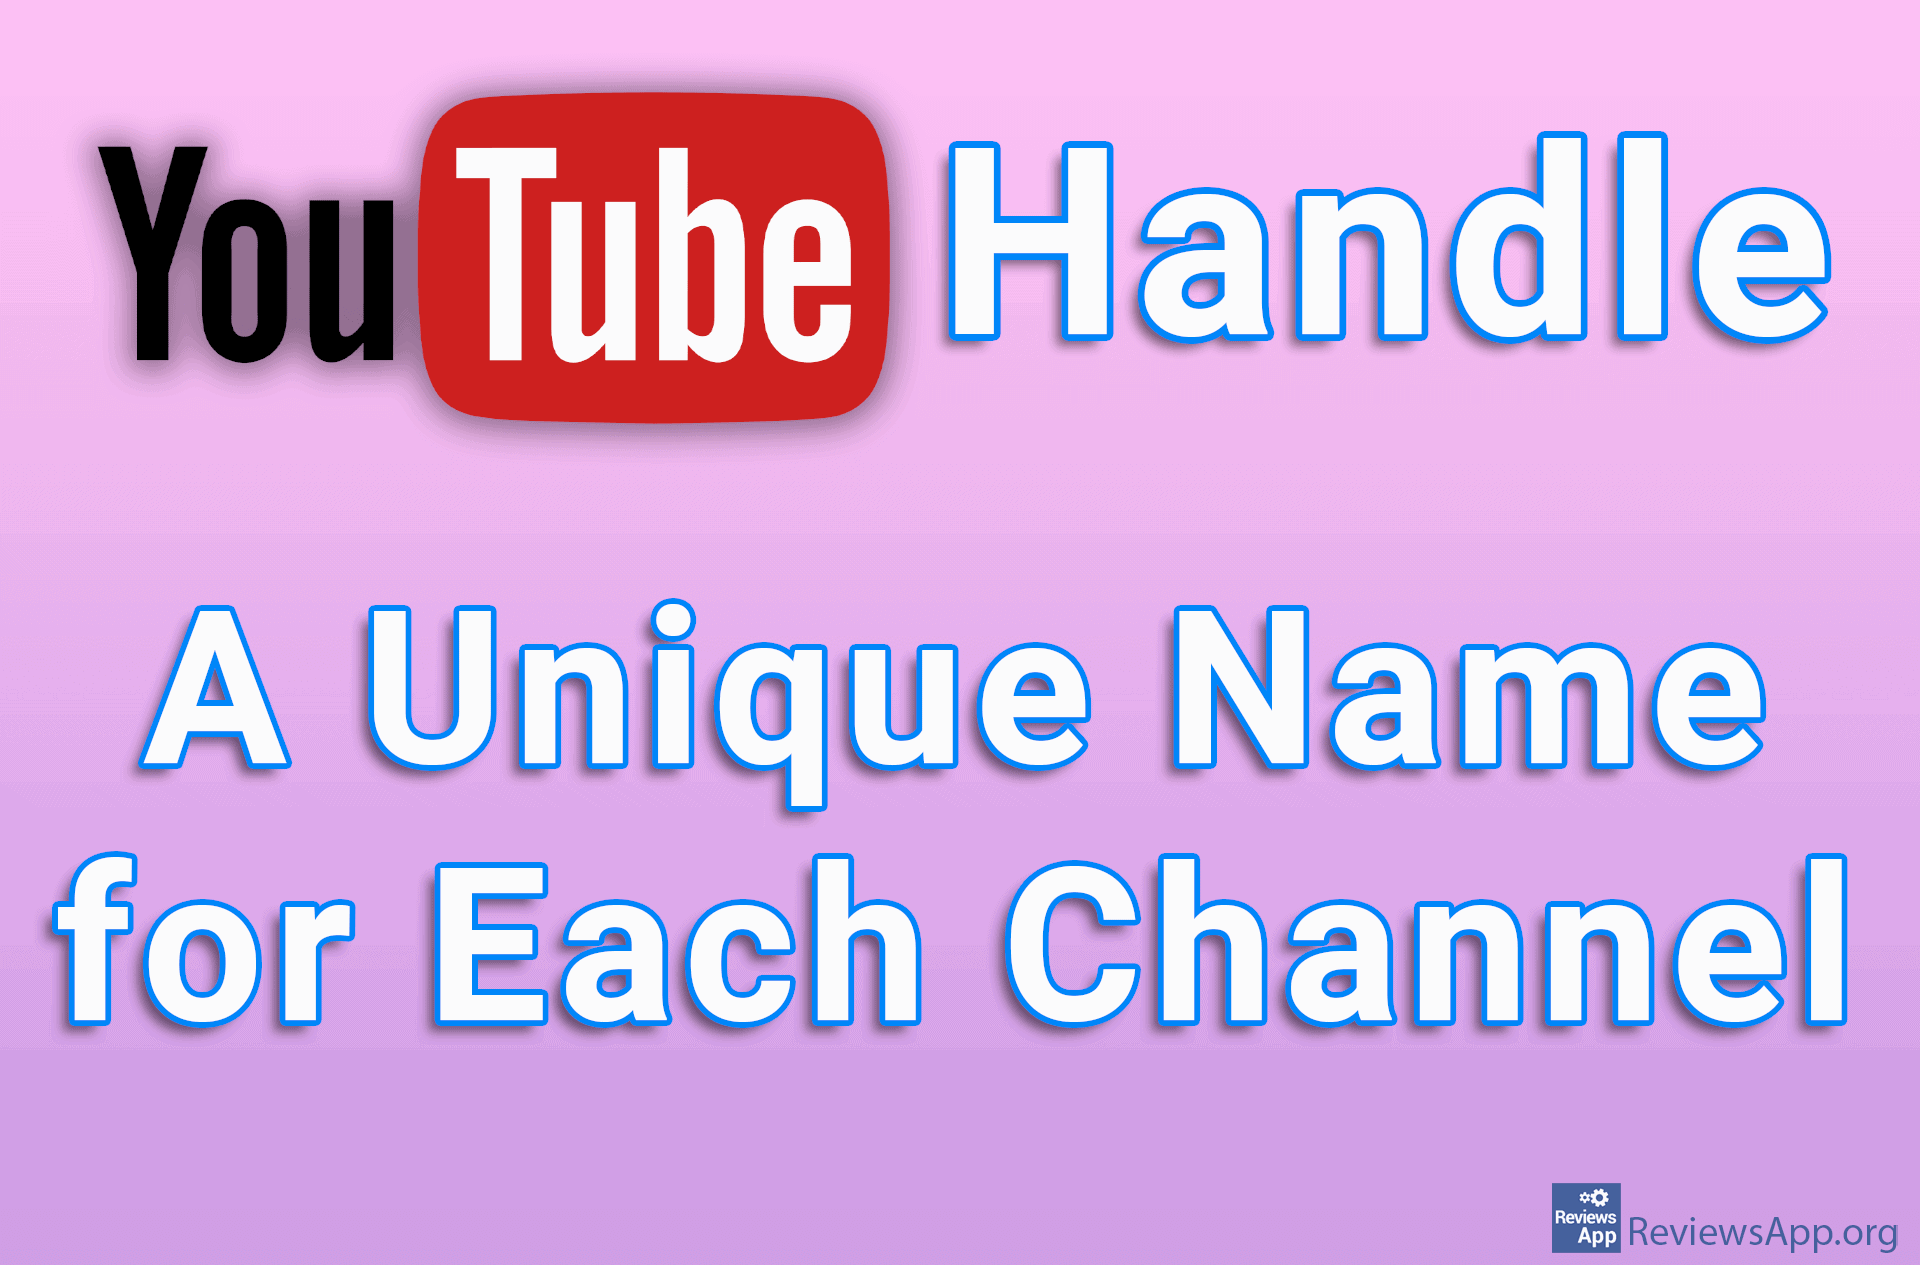 YouTube Handle – A Unique Name for Each Channel